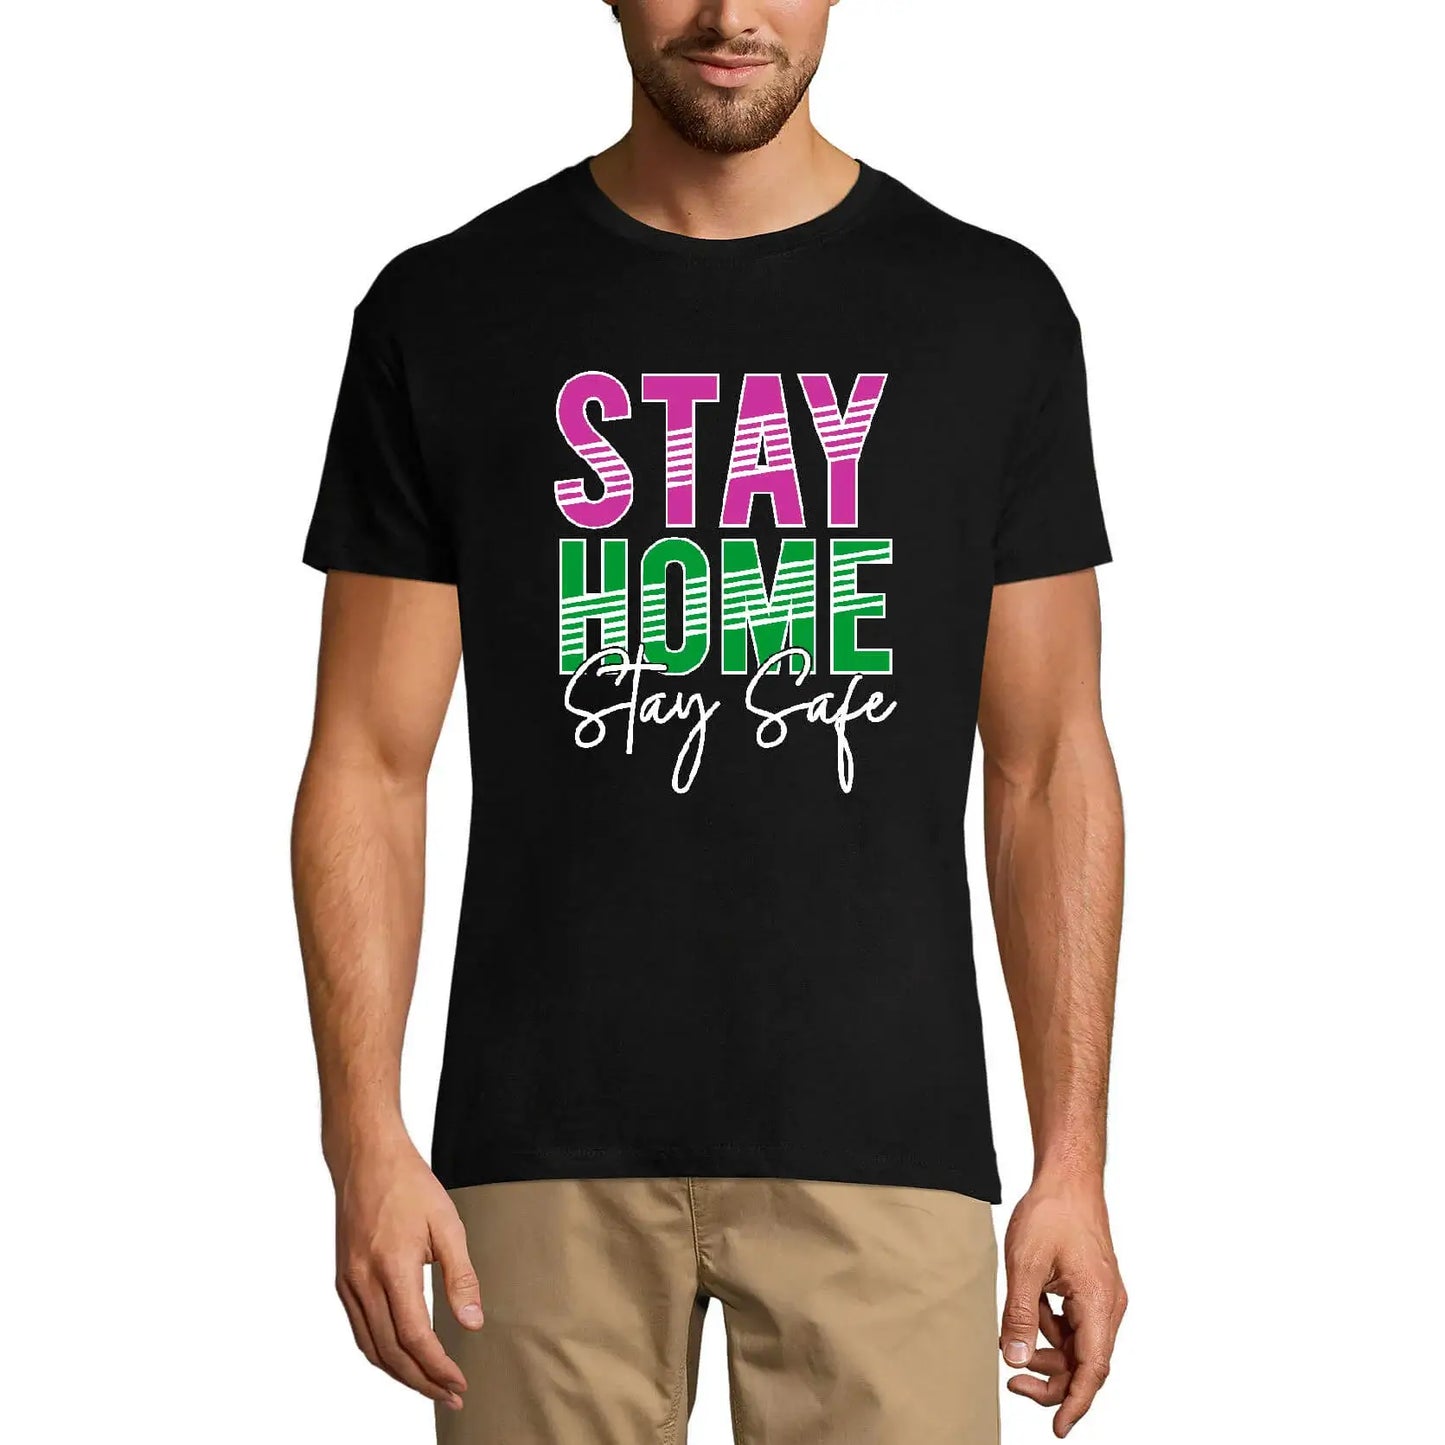 Men's Graphic T-Shirt Stay Home Stay Safe Eco-Friendly Limited Edition Short Sleeve Tee-Shirt Vintage Birthday Gift Novelty